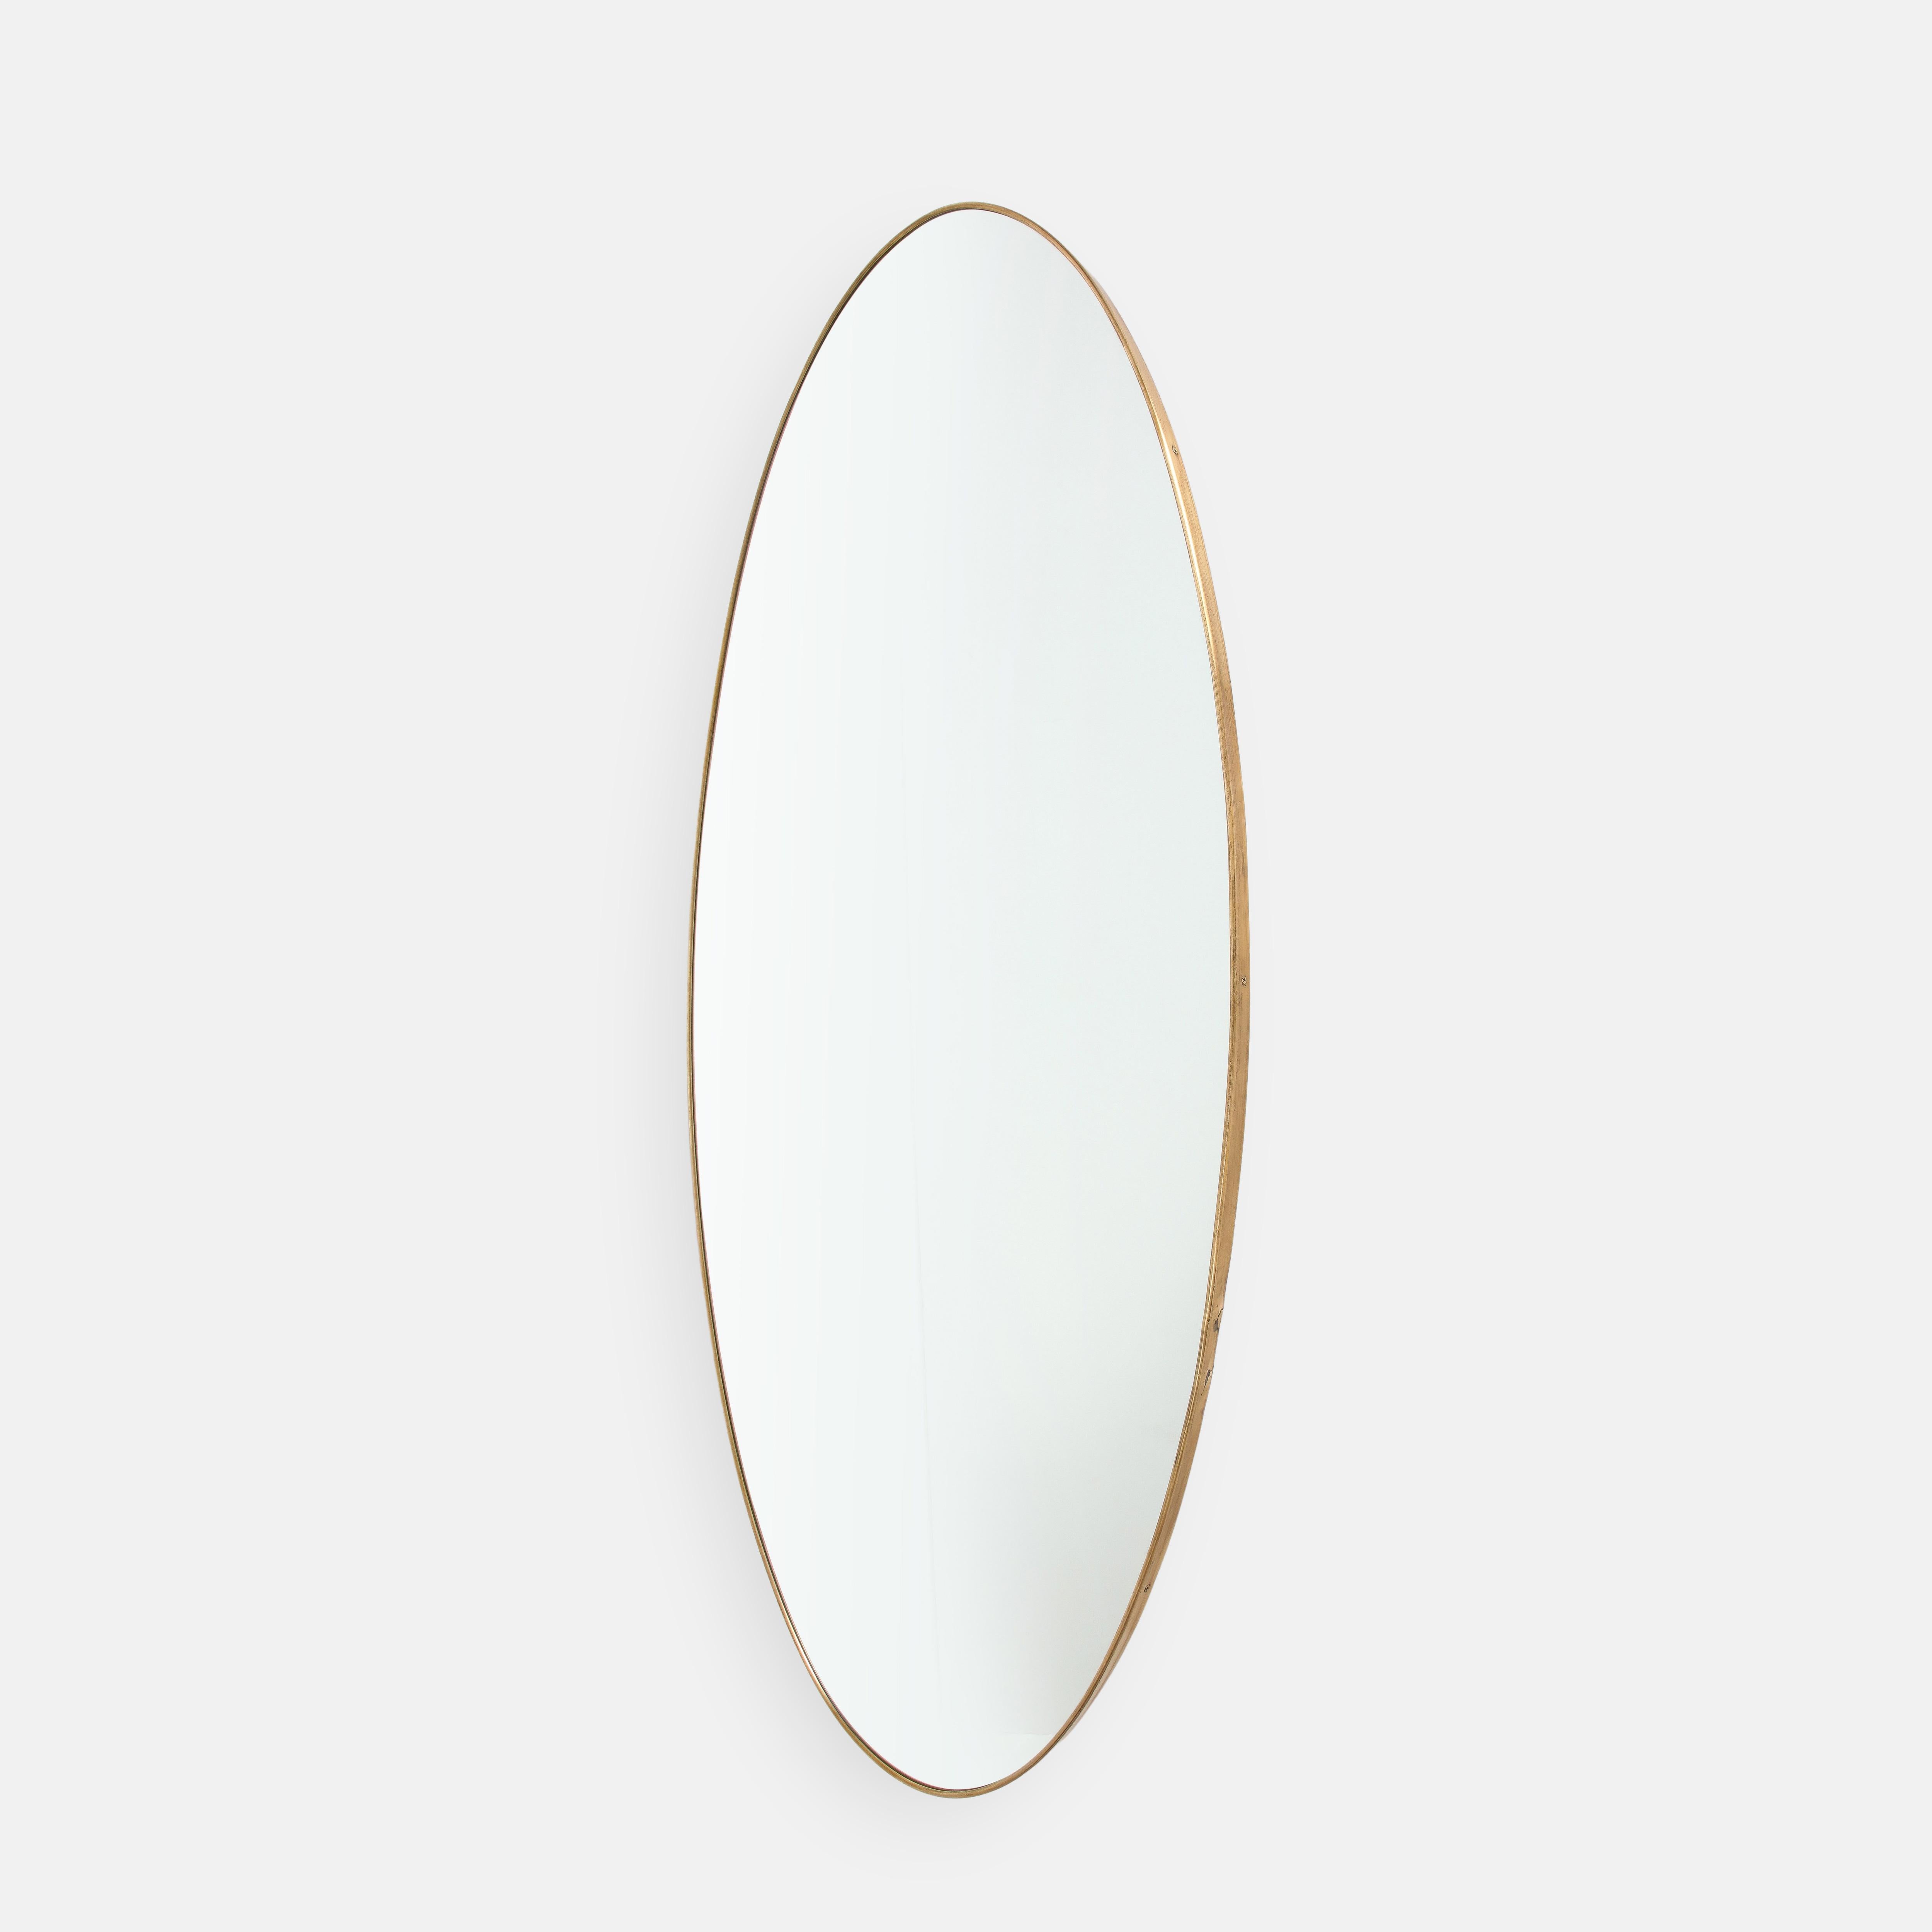 1950s Italian rare grand scale oval wall mirror. This elegant mirror is large and striking in size and has a beautiful rich patinated shaped brass frame and solid construction with wood backing. This monumental size brass mirror is very rare to find